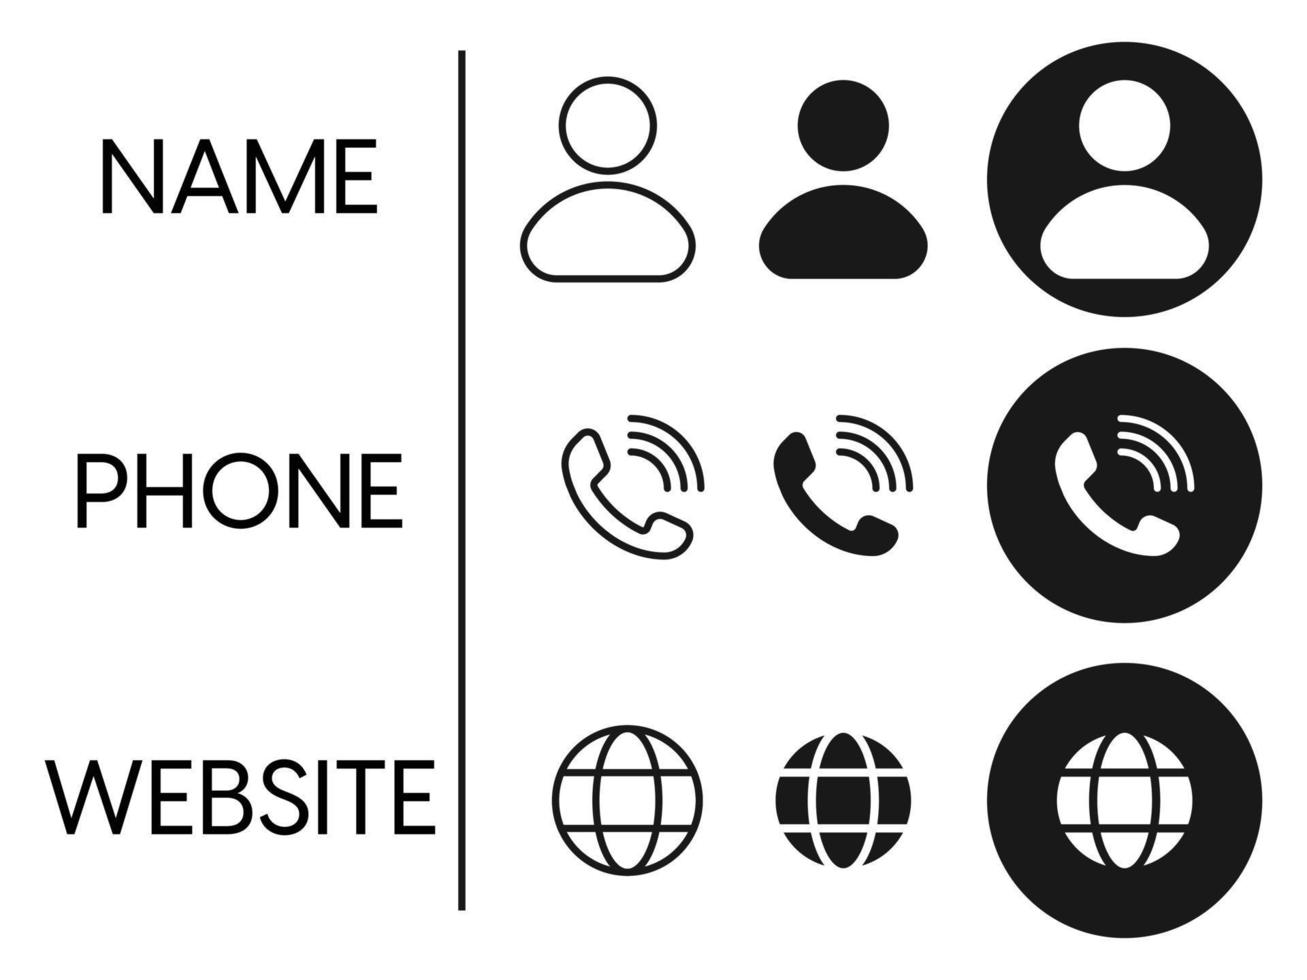 Set of Website icon vector. Communication icon symbol vectors. Communication icon symbols vectors Graphic